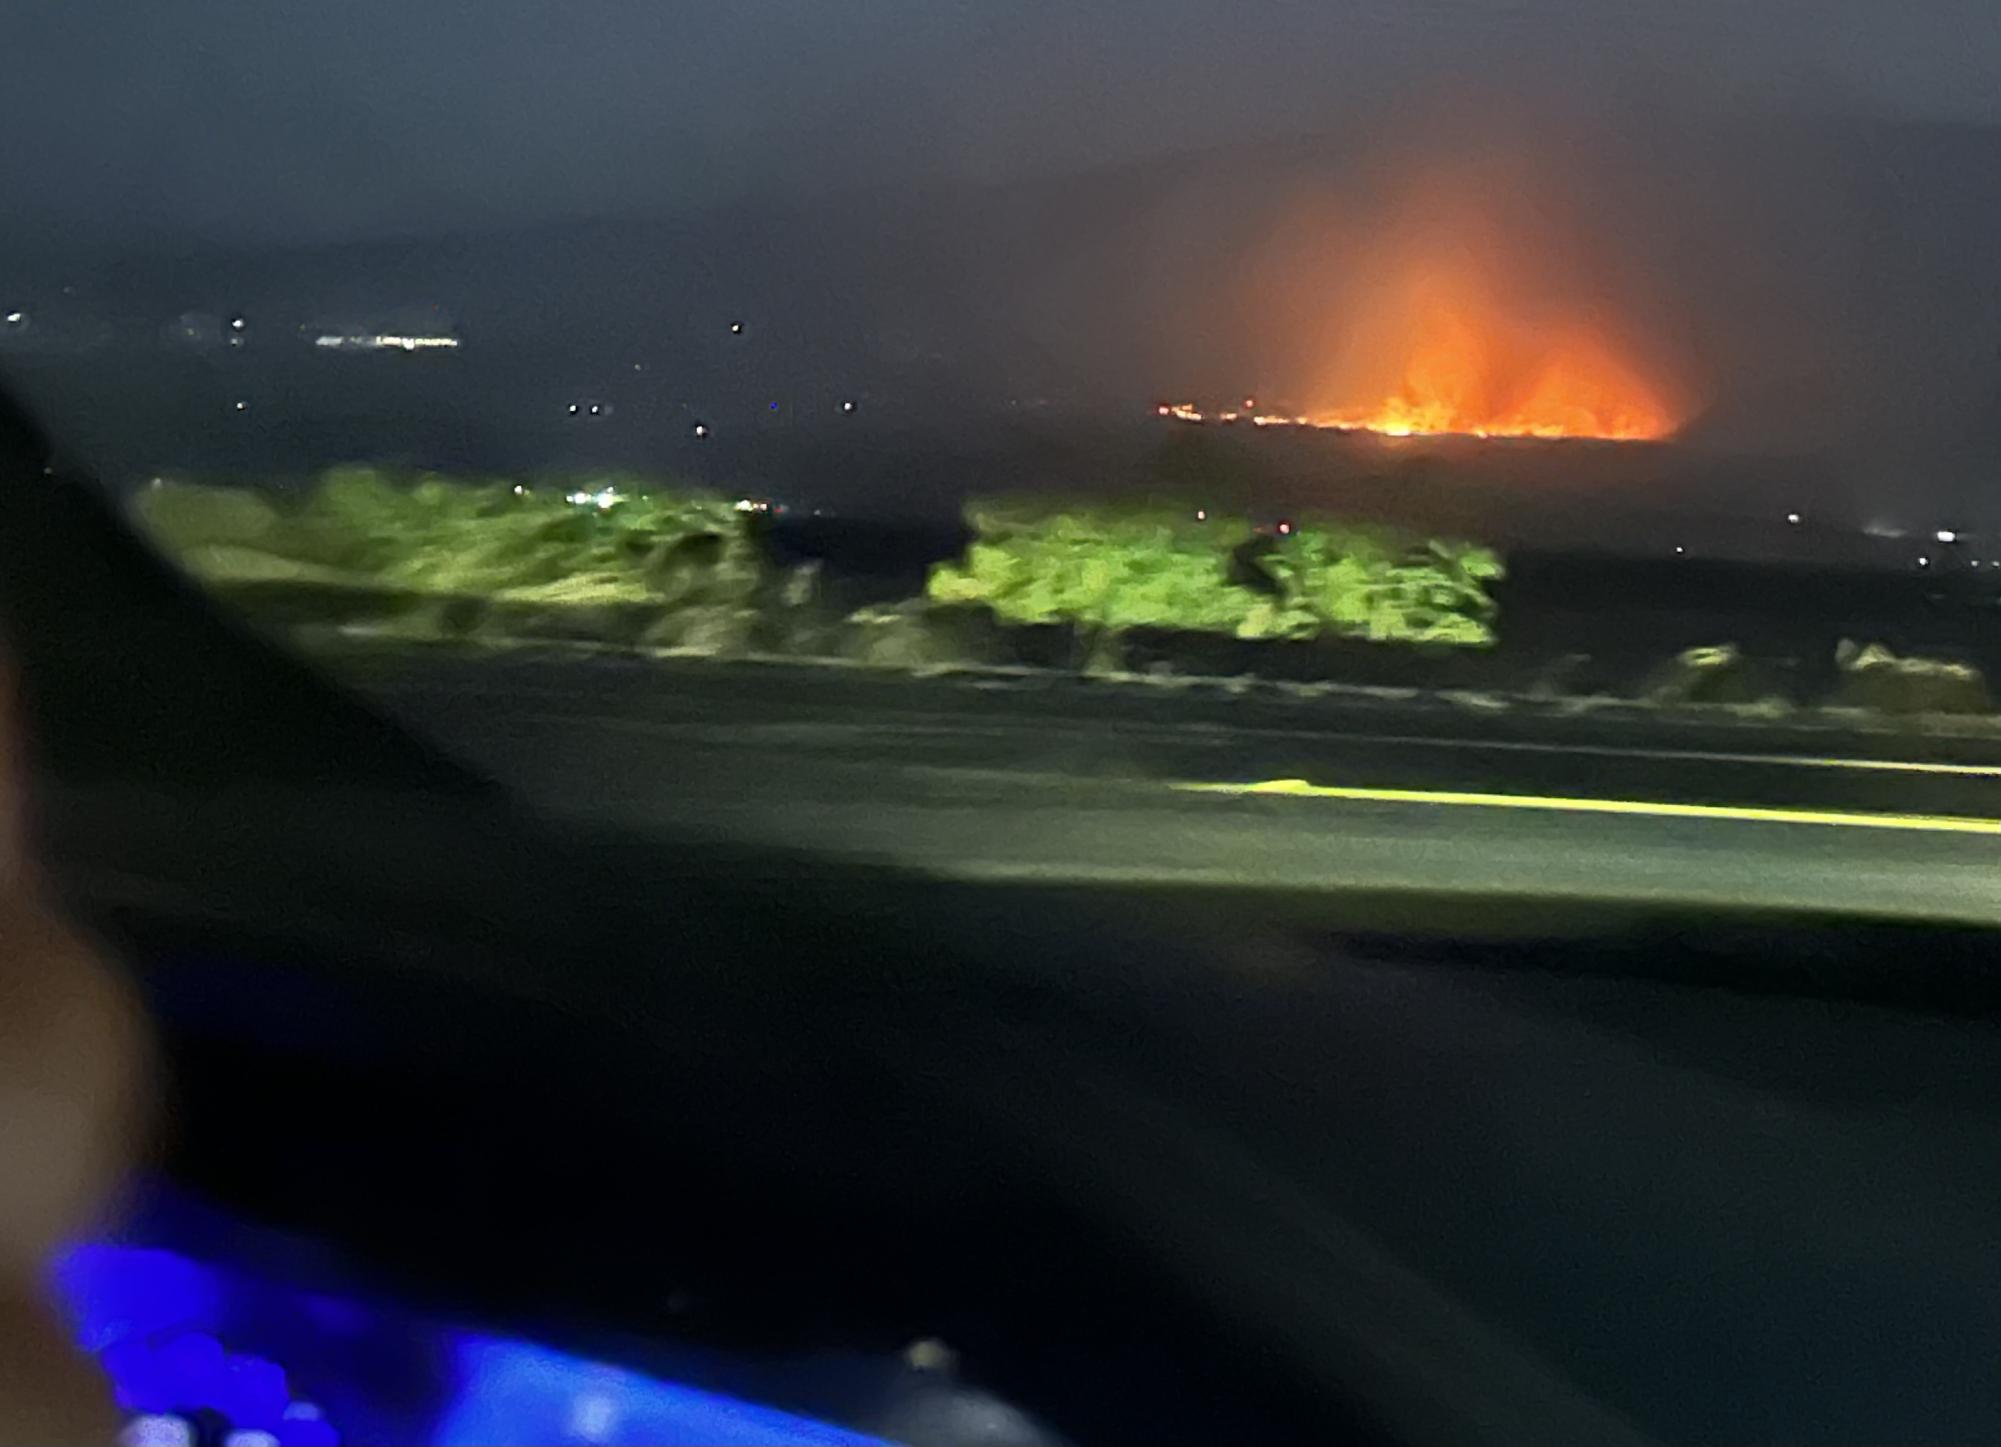 VIEW: The deadly inferno was well ablaze as the Jacobsons waited in traffic on the road back toward Lahaina. “We were lucky we had gone on that day trip, because we were never really close to the fires,” said Ms. Jacobson.